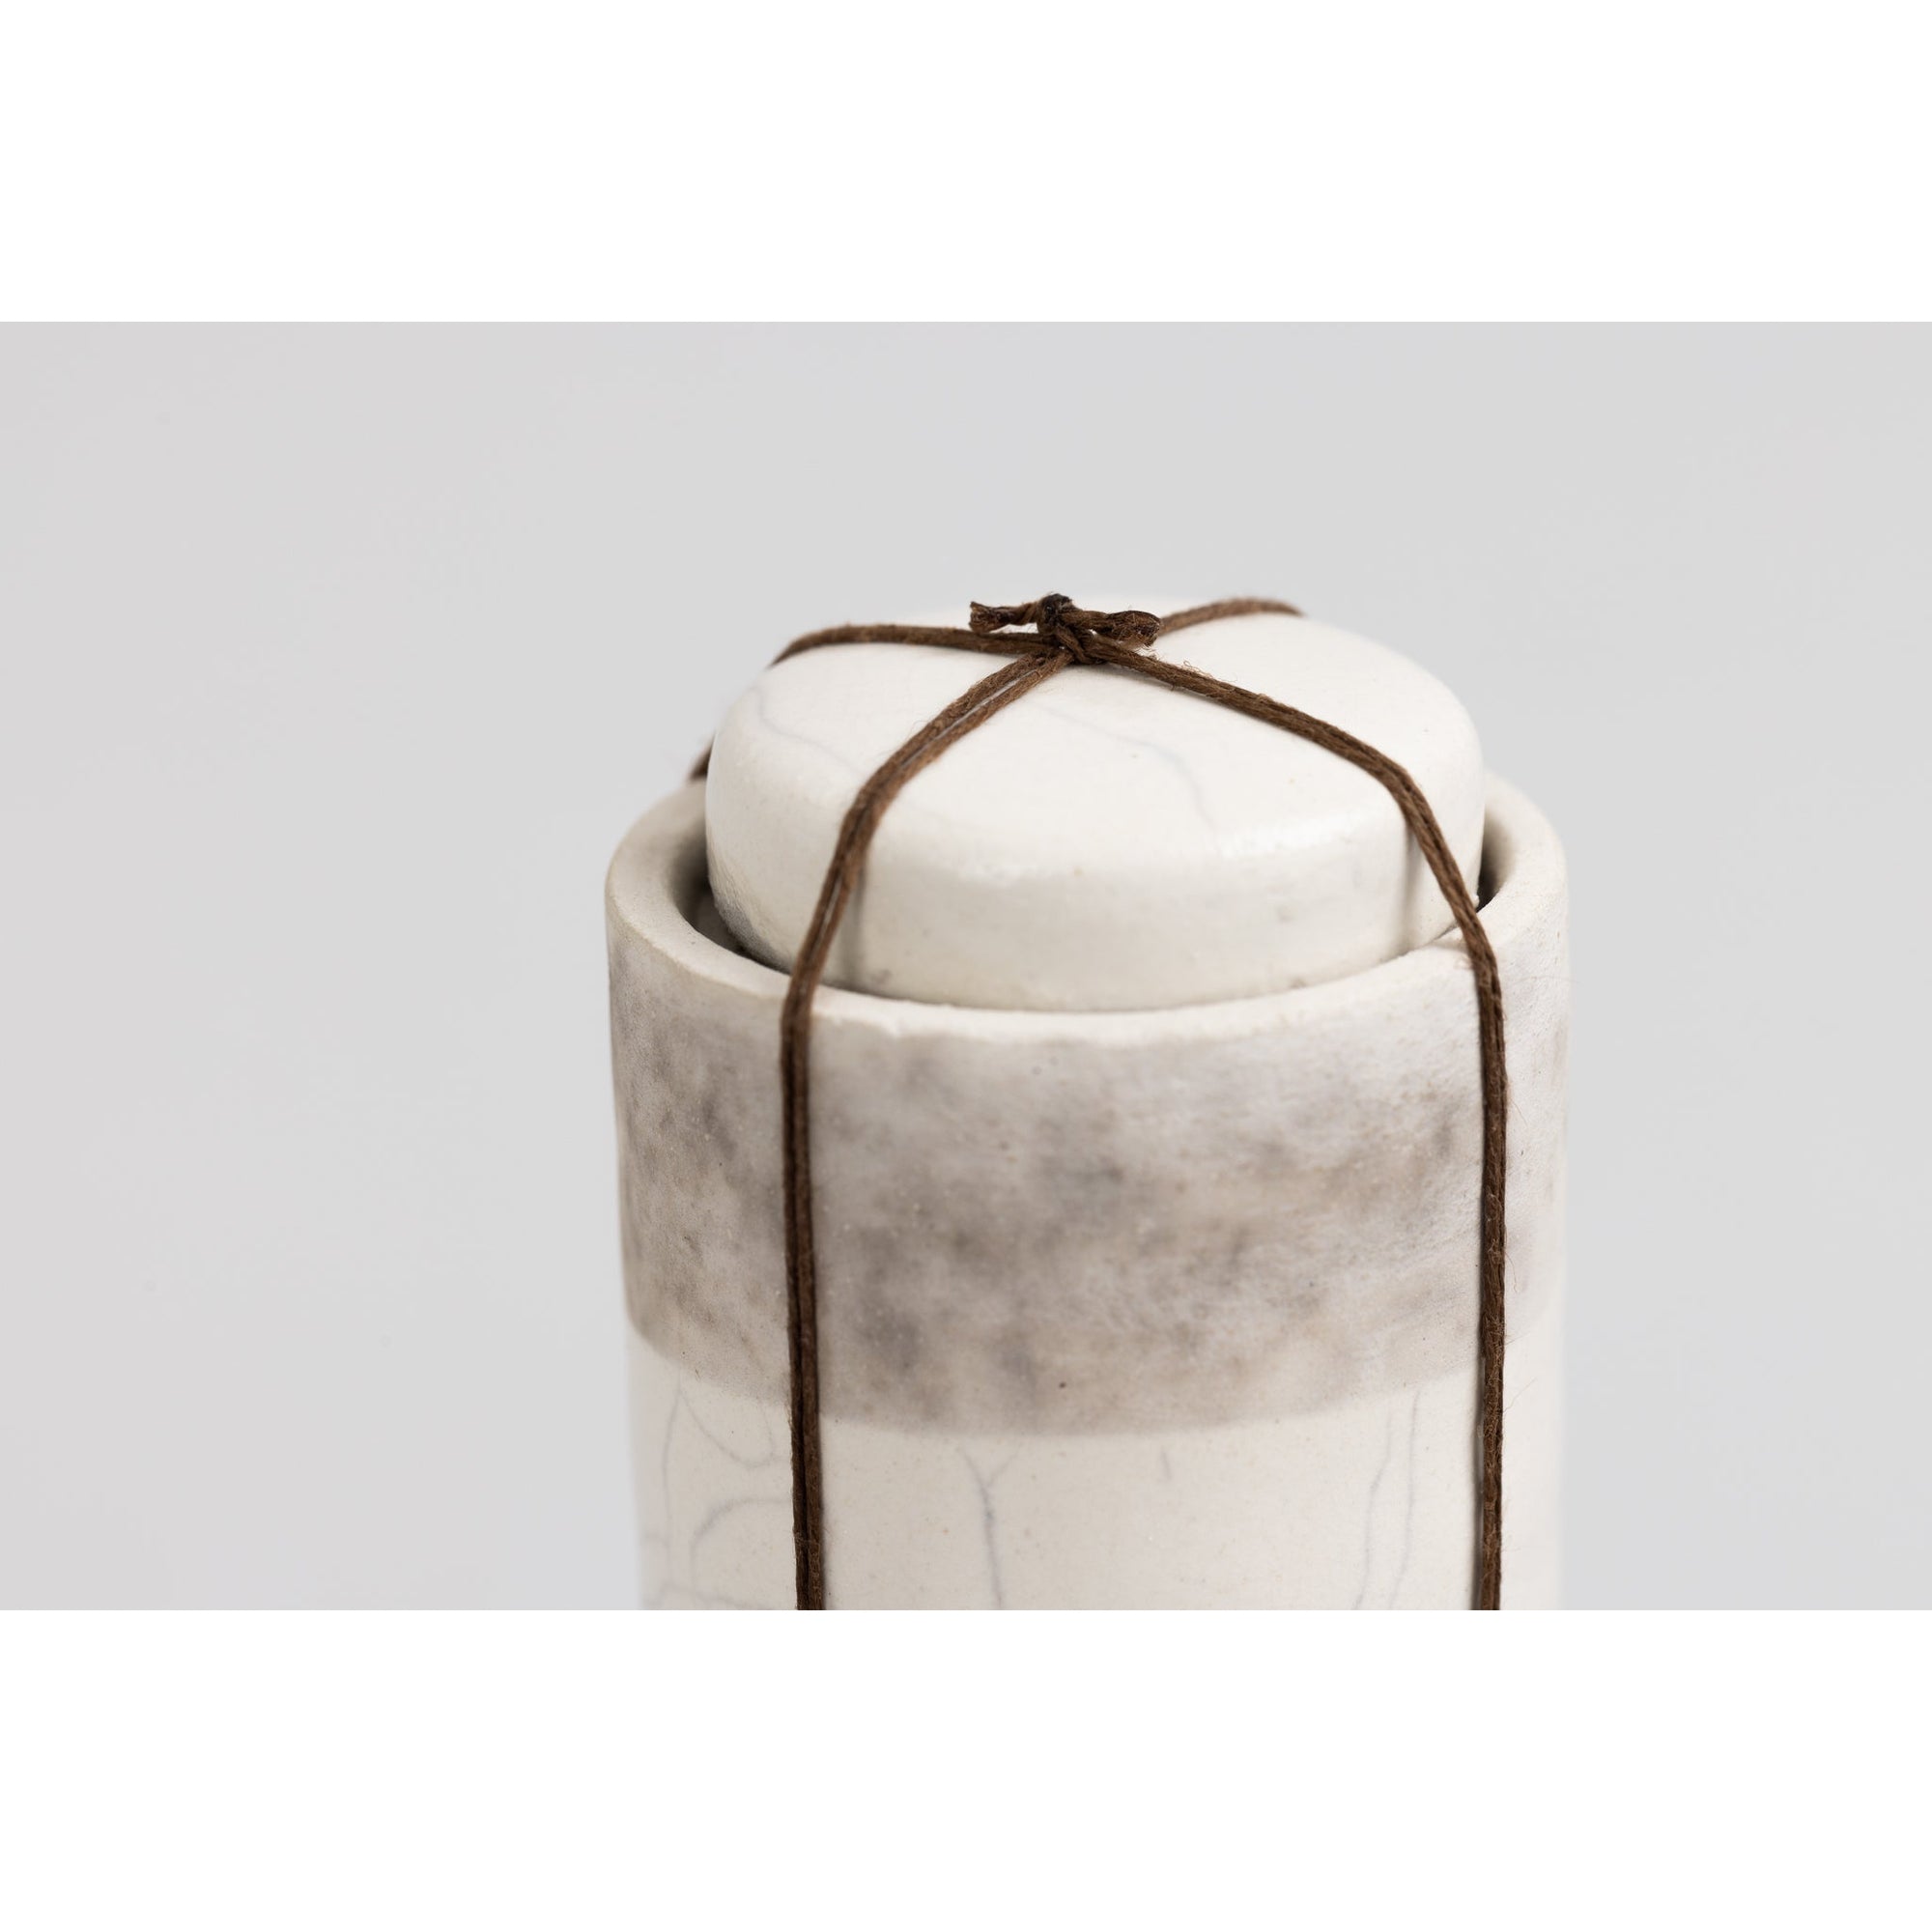 KSEE1 Raku Bound Container by Kate Schuricht, available at Padstow Gallery, Cornwall